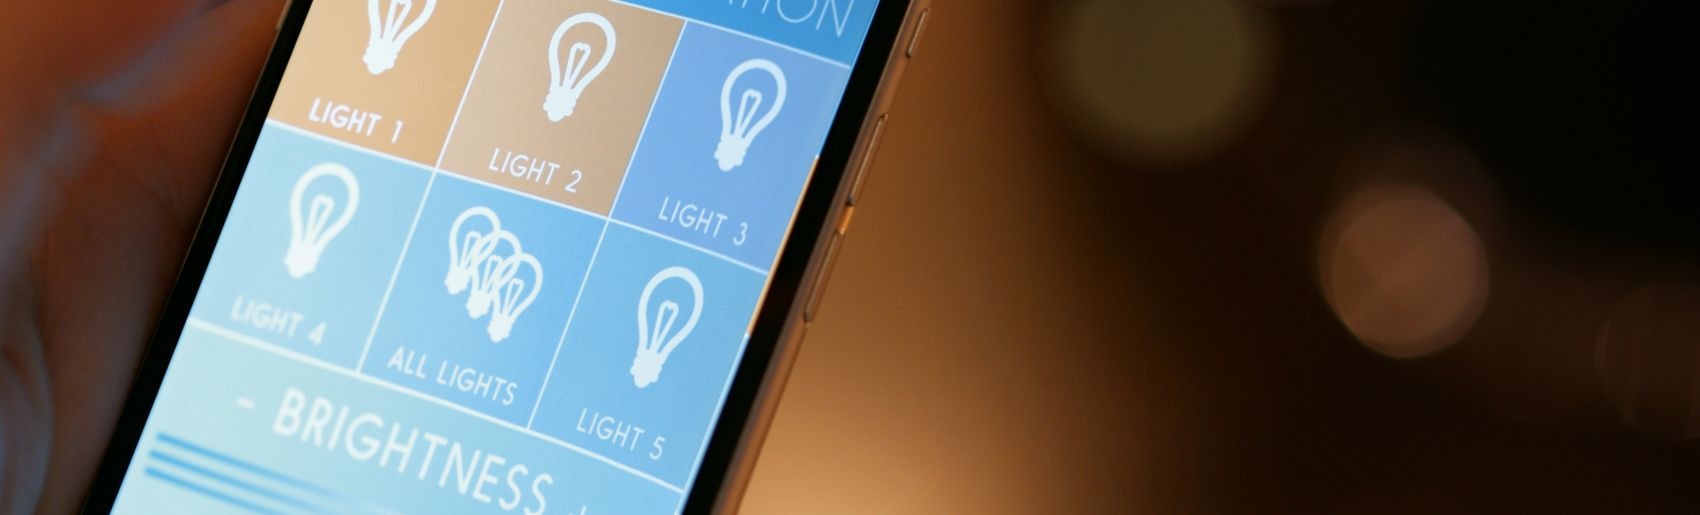 home automation lighting systems